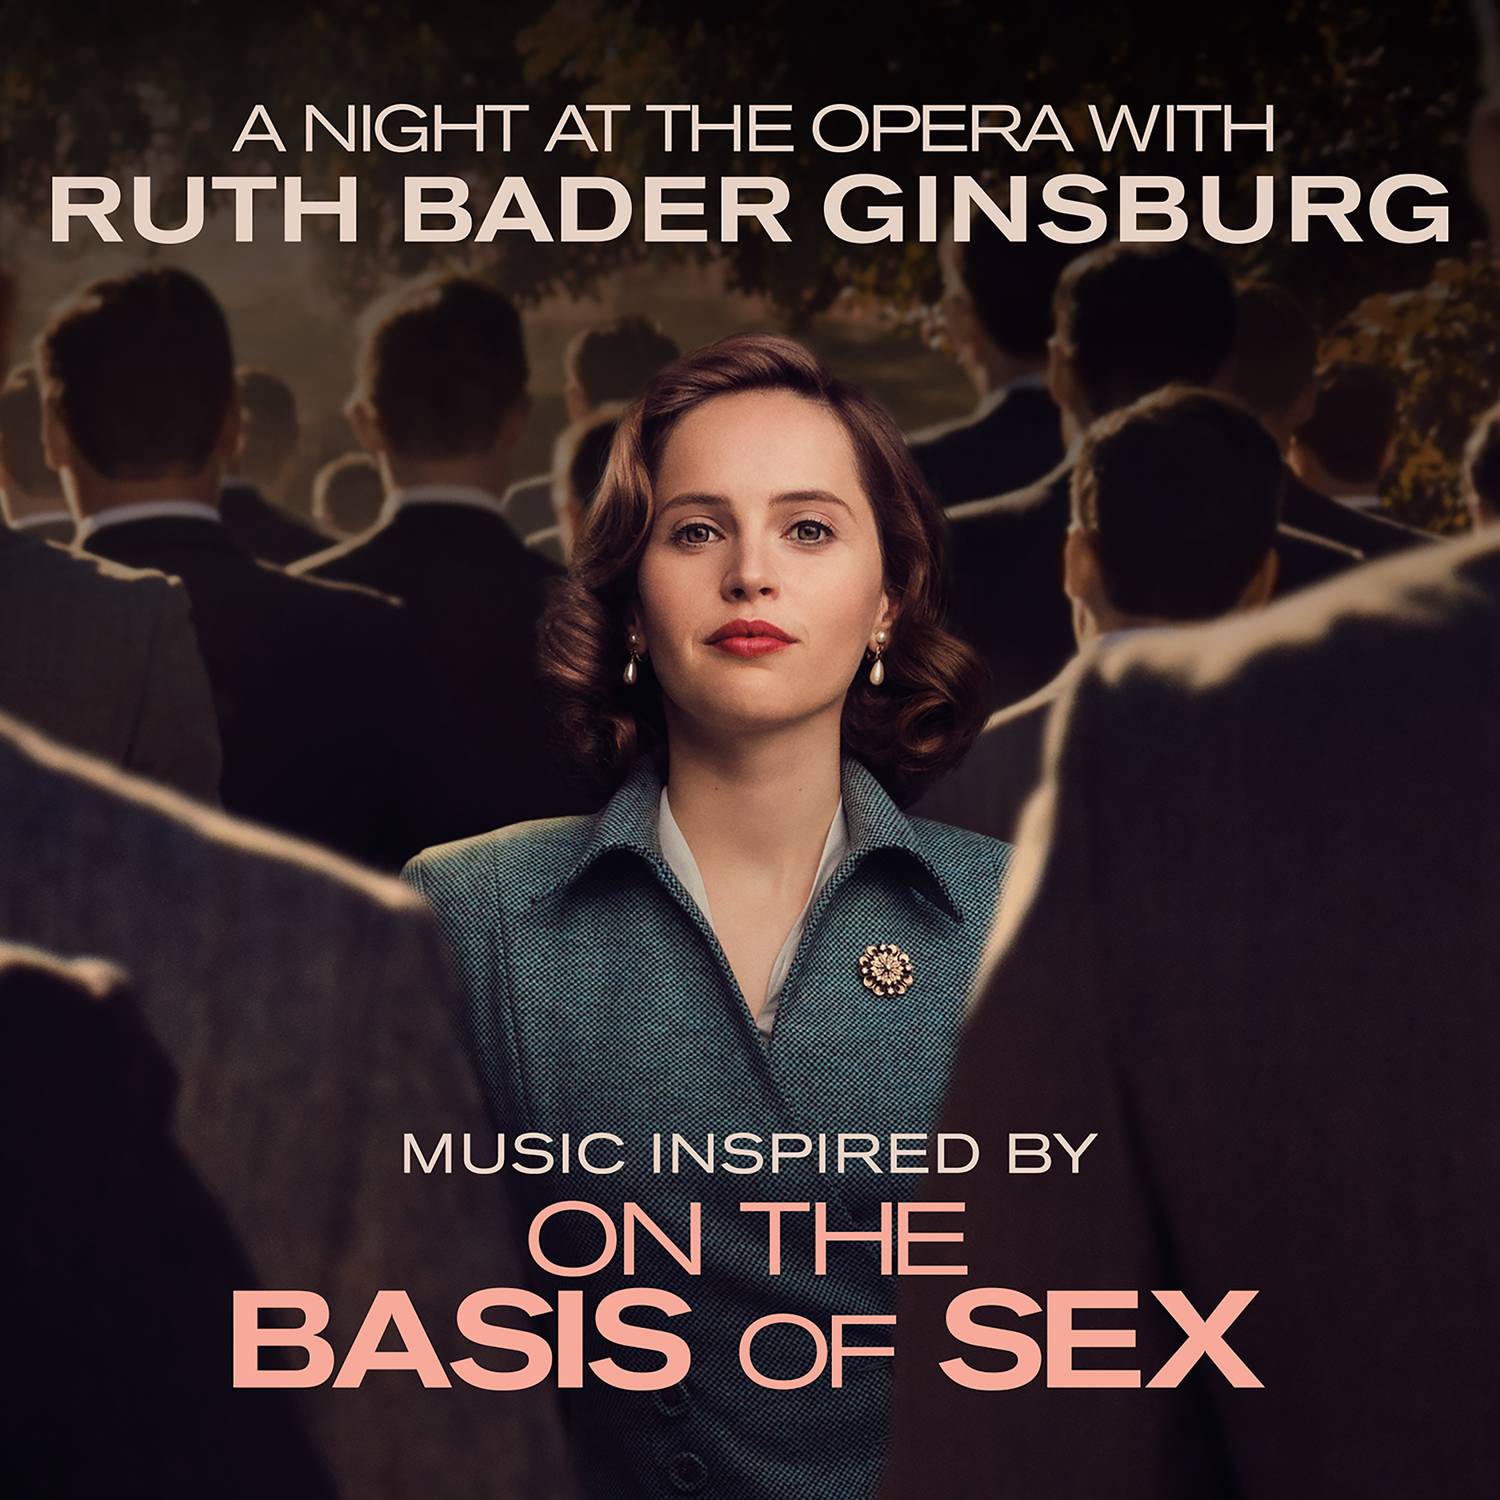 Music Inspired by "On the Basis of ***" - A Night at the Opera with Ruth Bader Ginsburg